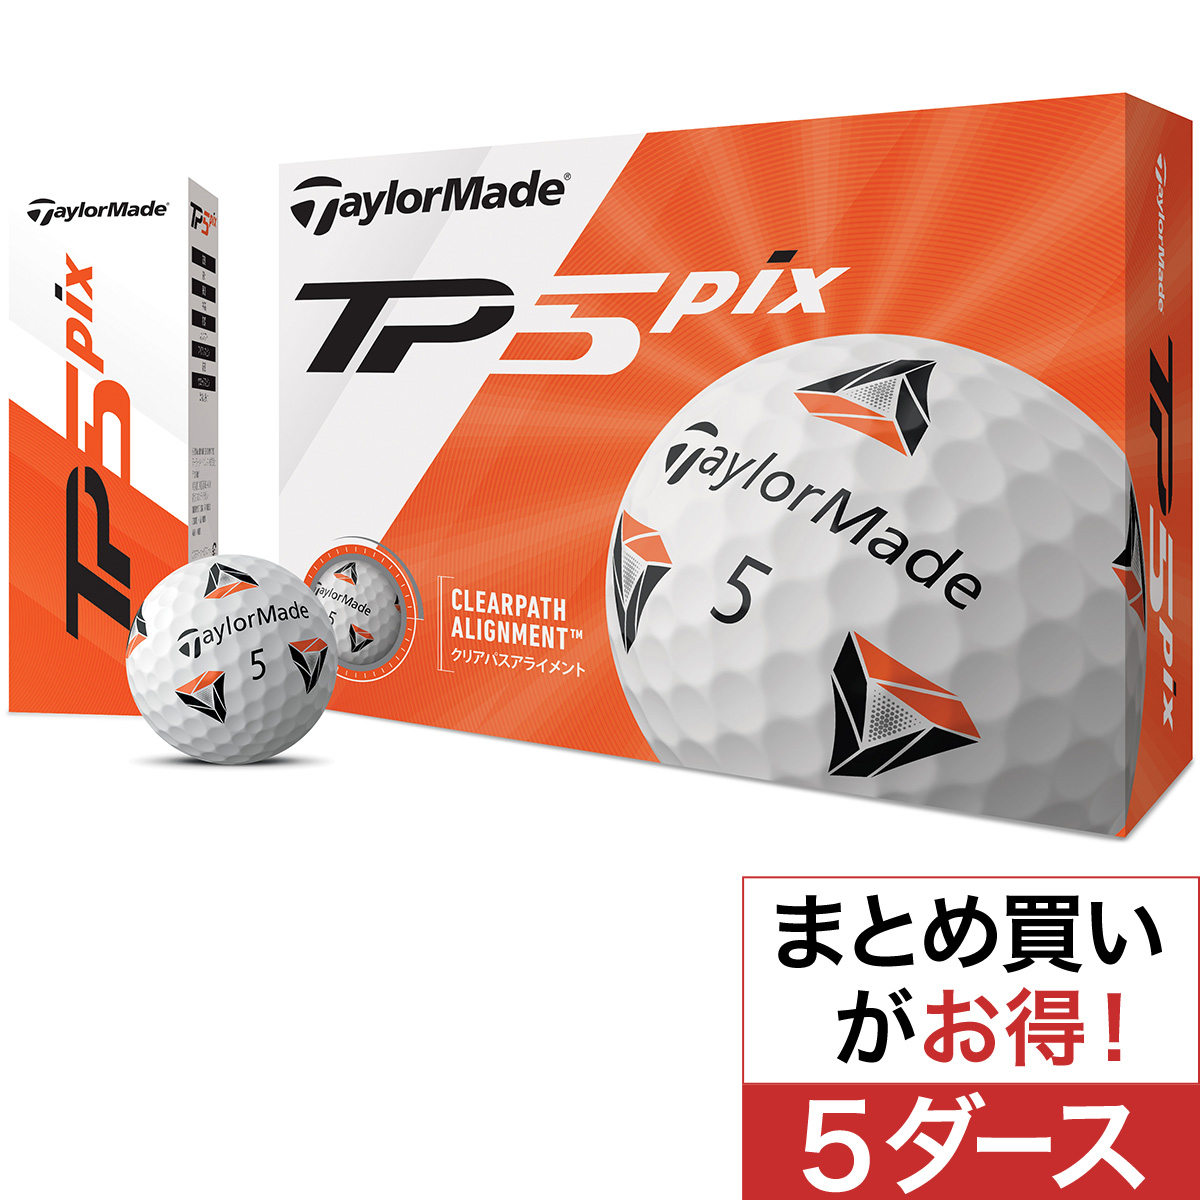  TP5 pix ボール 5ダースセット 